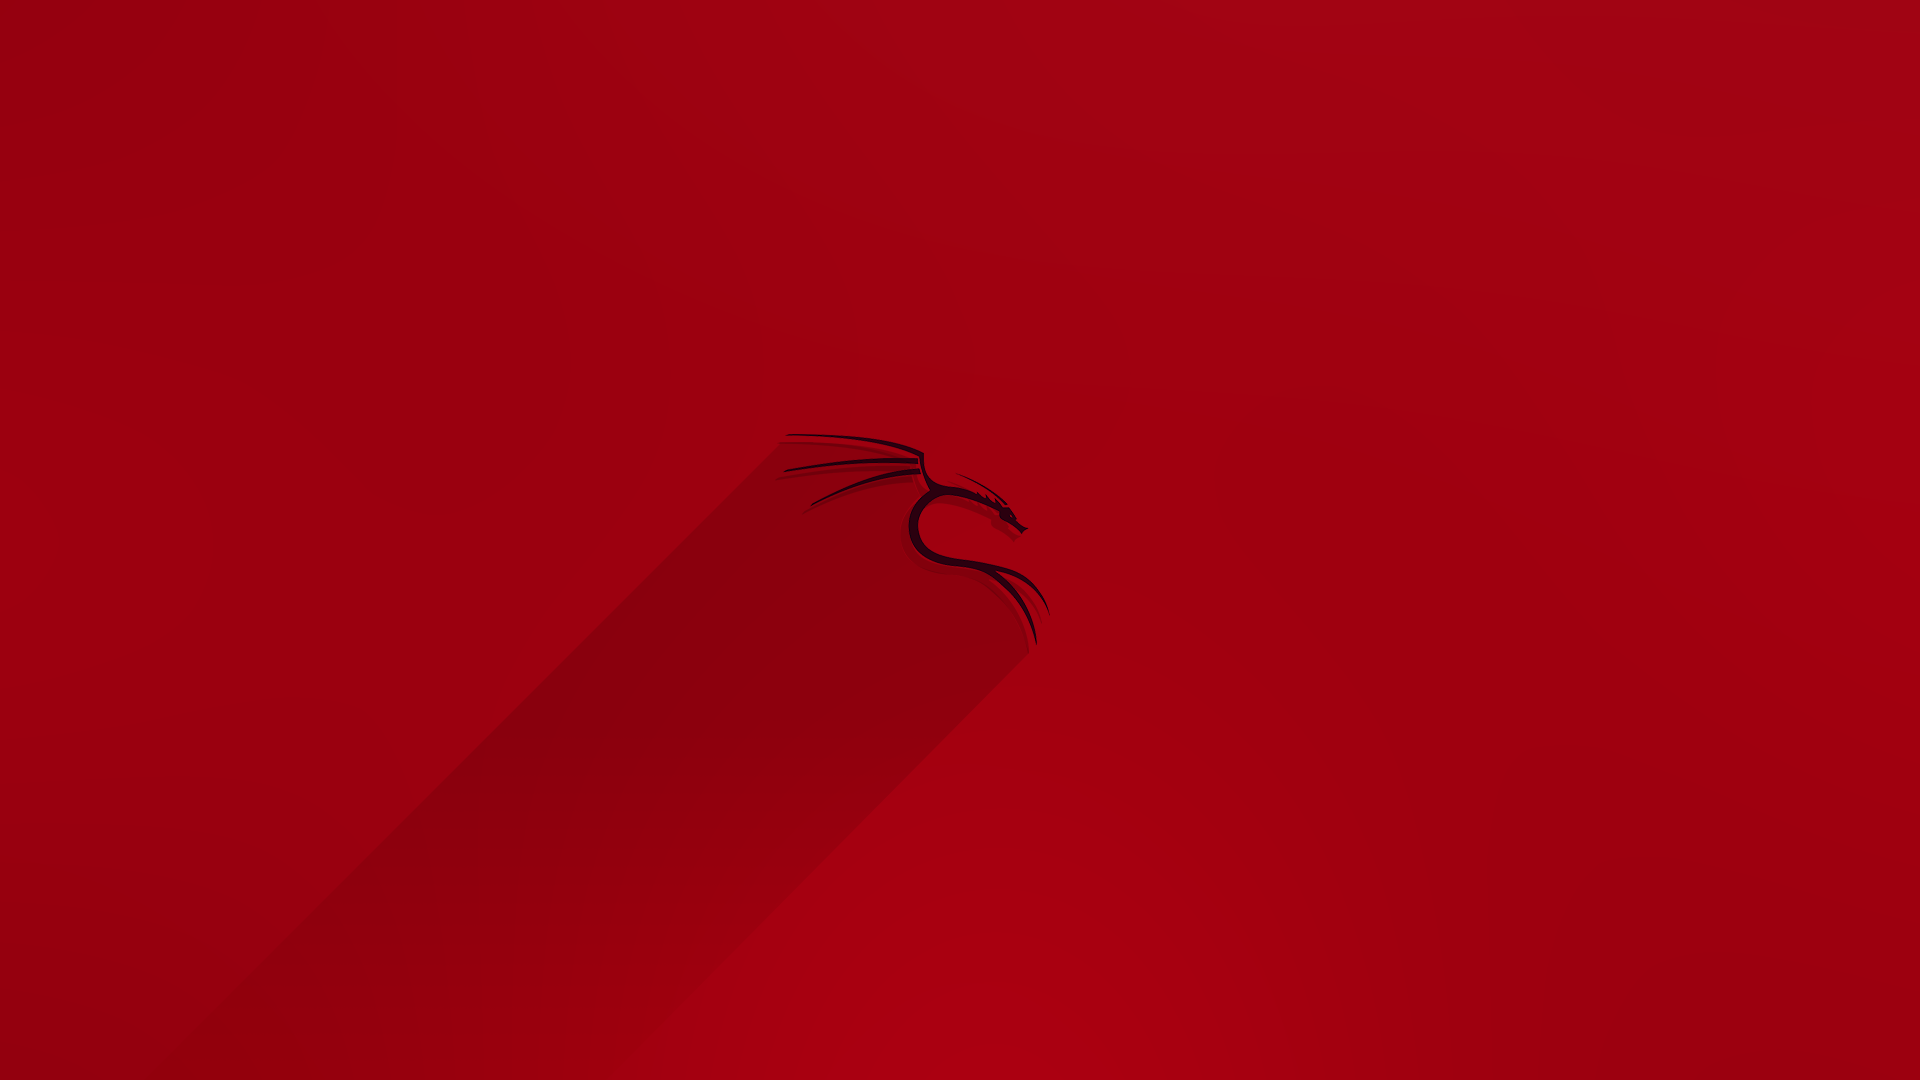 Kali linux p k k full hd wallpapers backgrounds free download wallpaper crafter